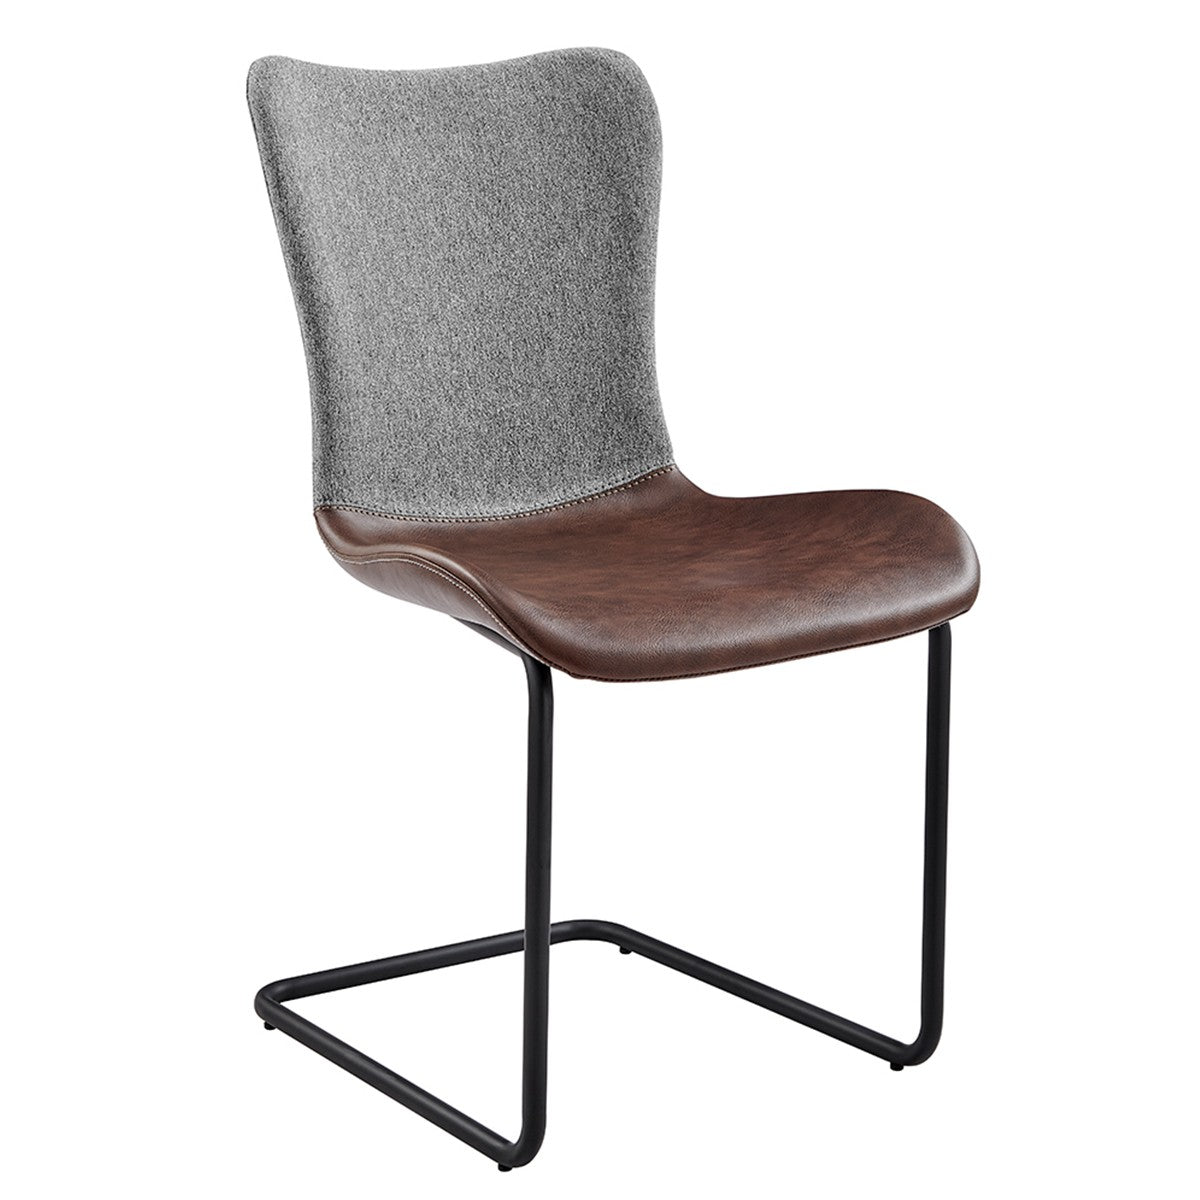 Set of Two Brown Metro Mix Cantilever Dining Chairs